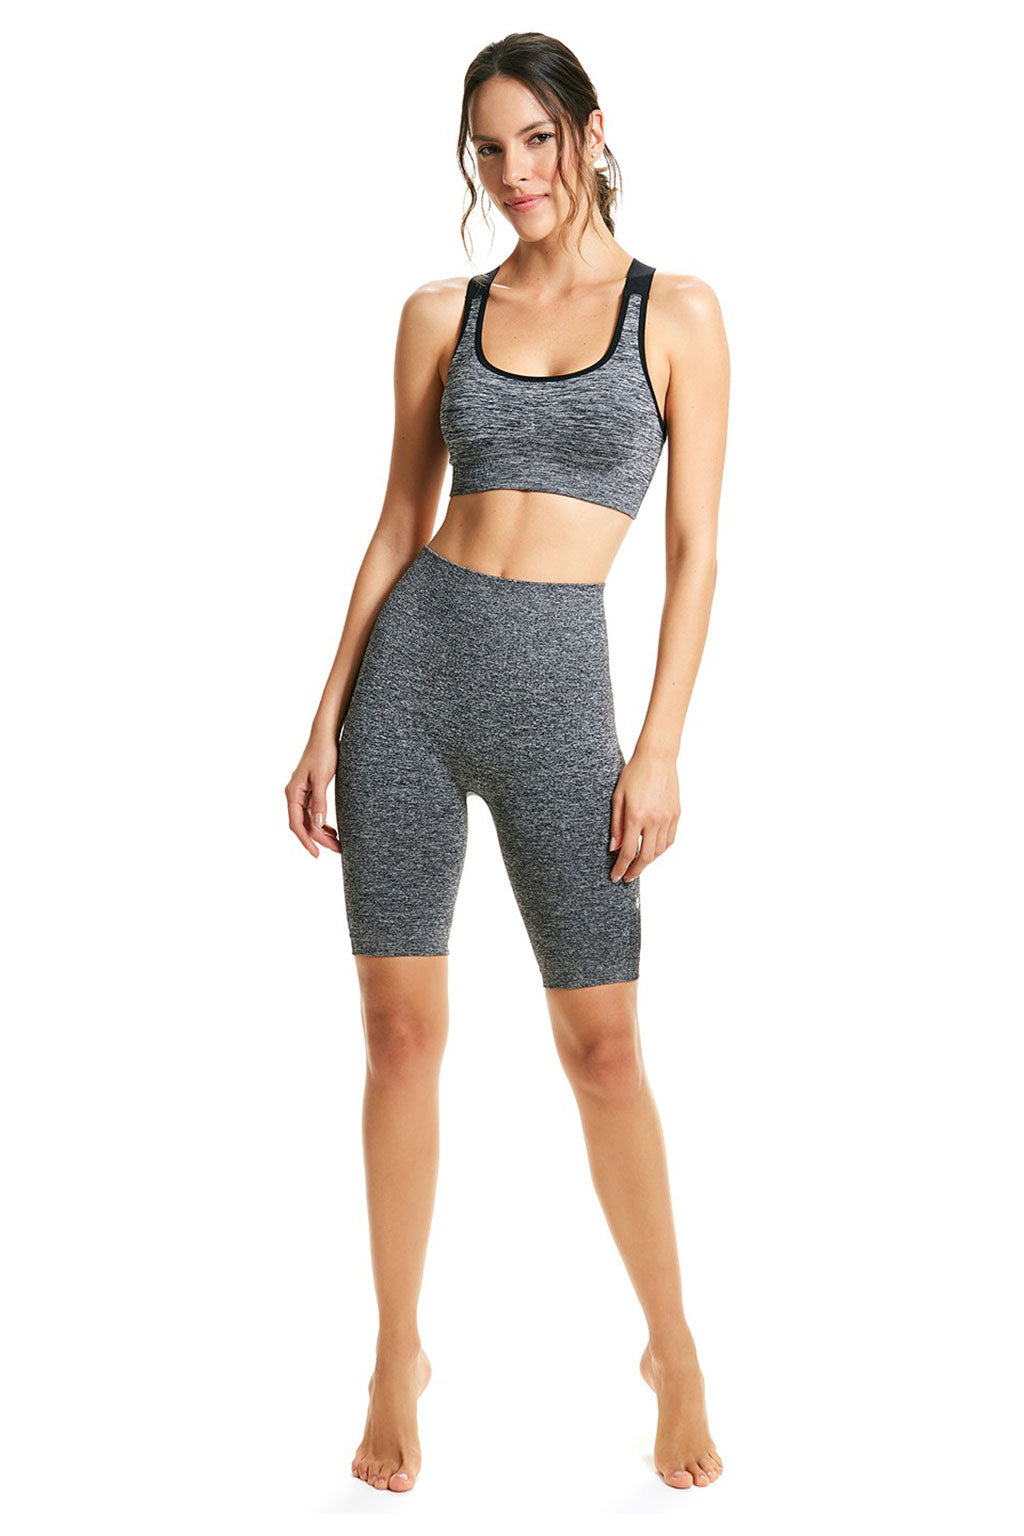 FITNESS Sport Bermuda with double waistband